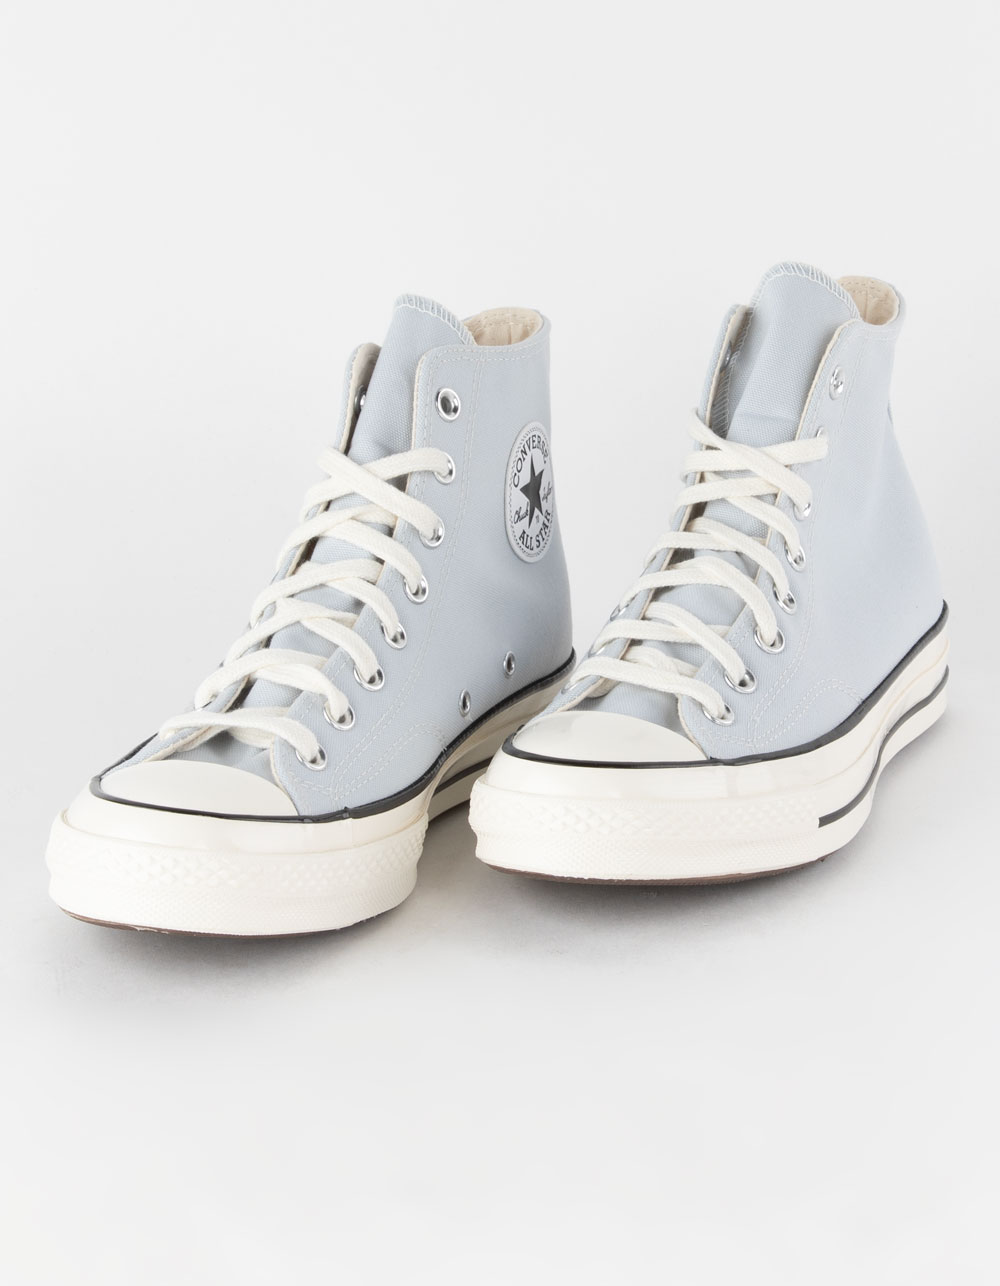 CONVERSE Chuck Taylor All Star 70 High Top Shoes